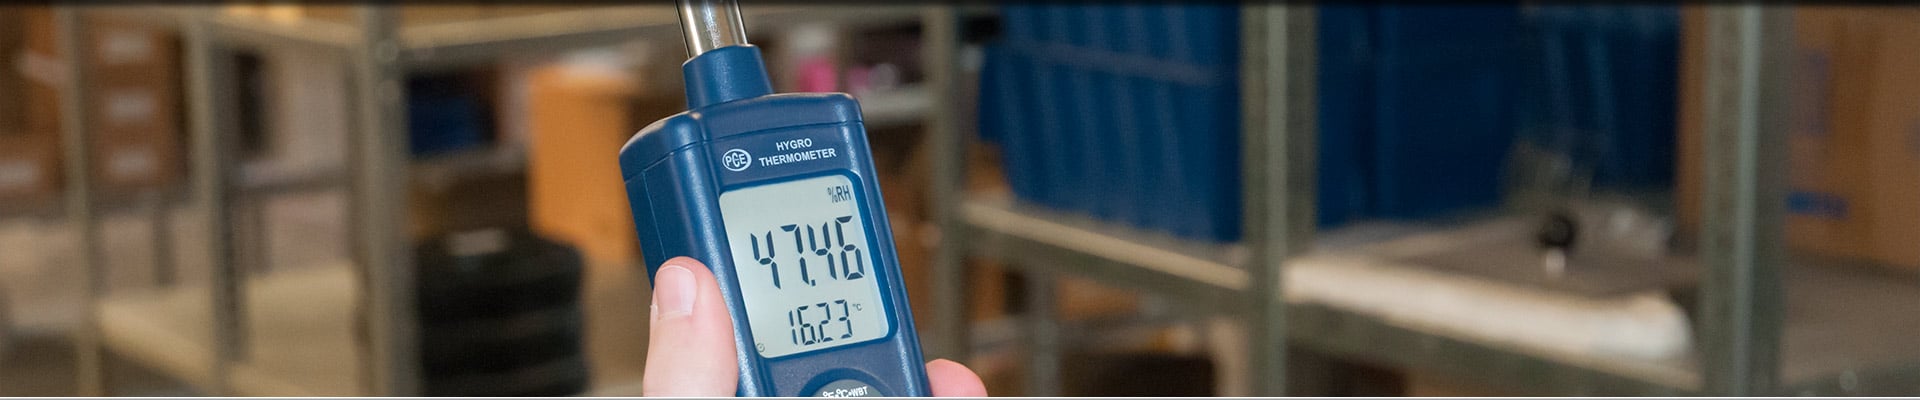 instrument that measures relative humidity